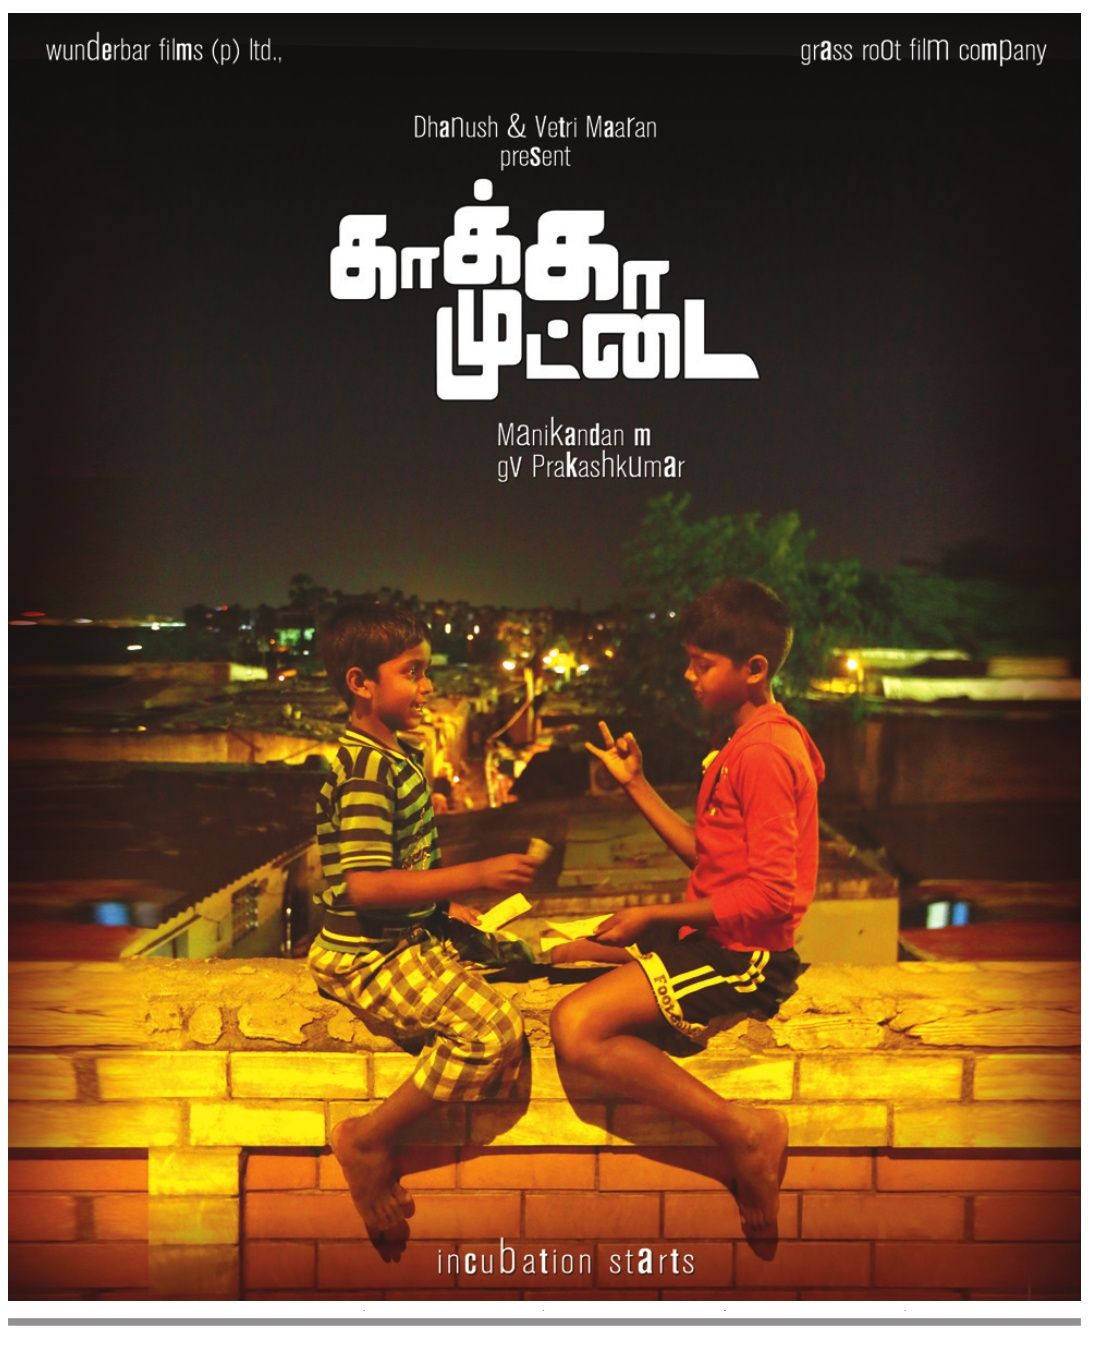 Kaaka Muttai to have its world premiere at the TIFF